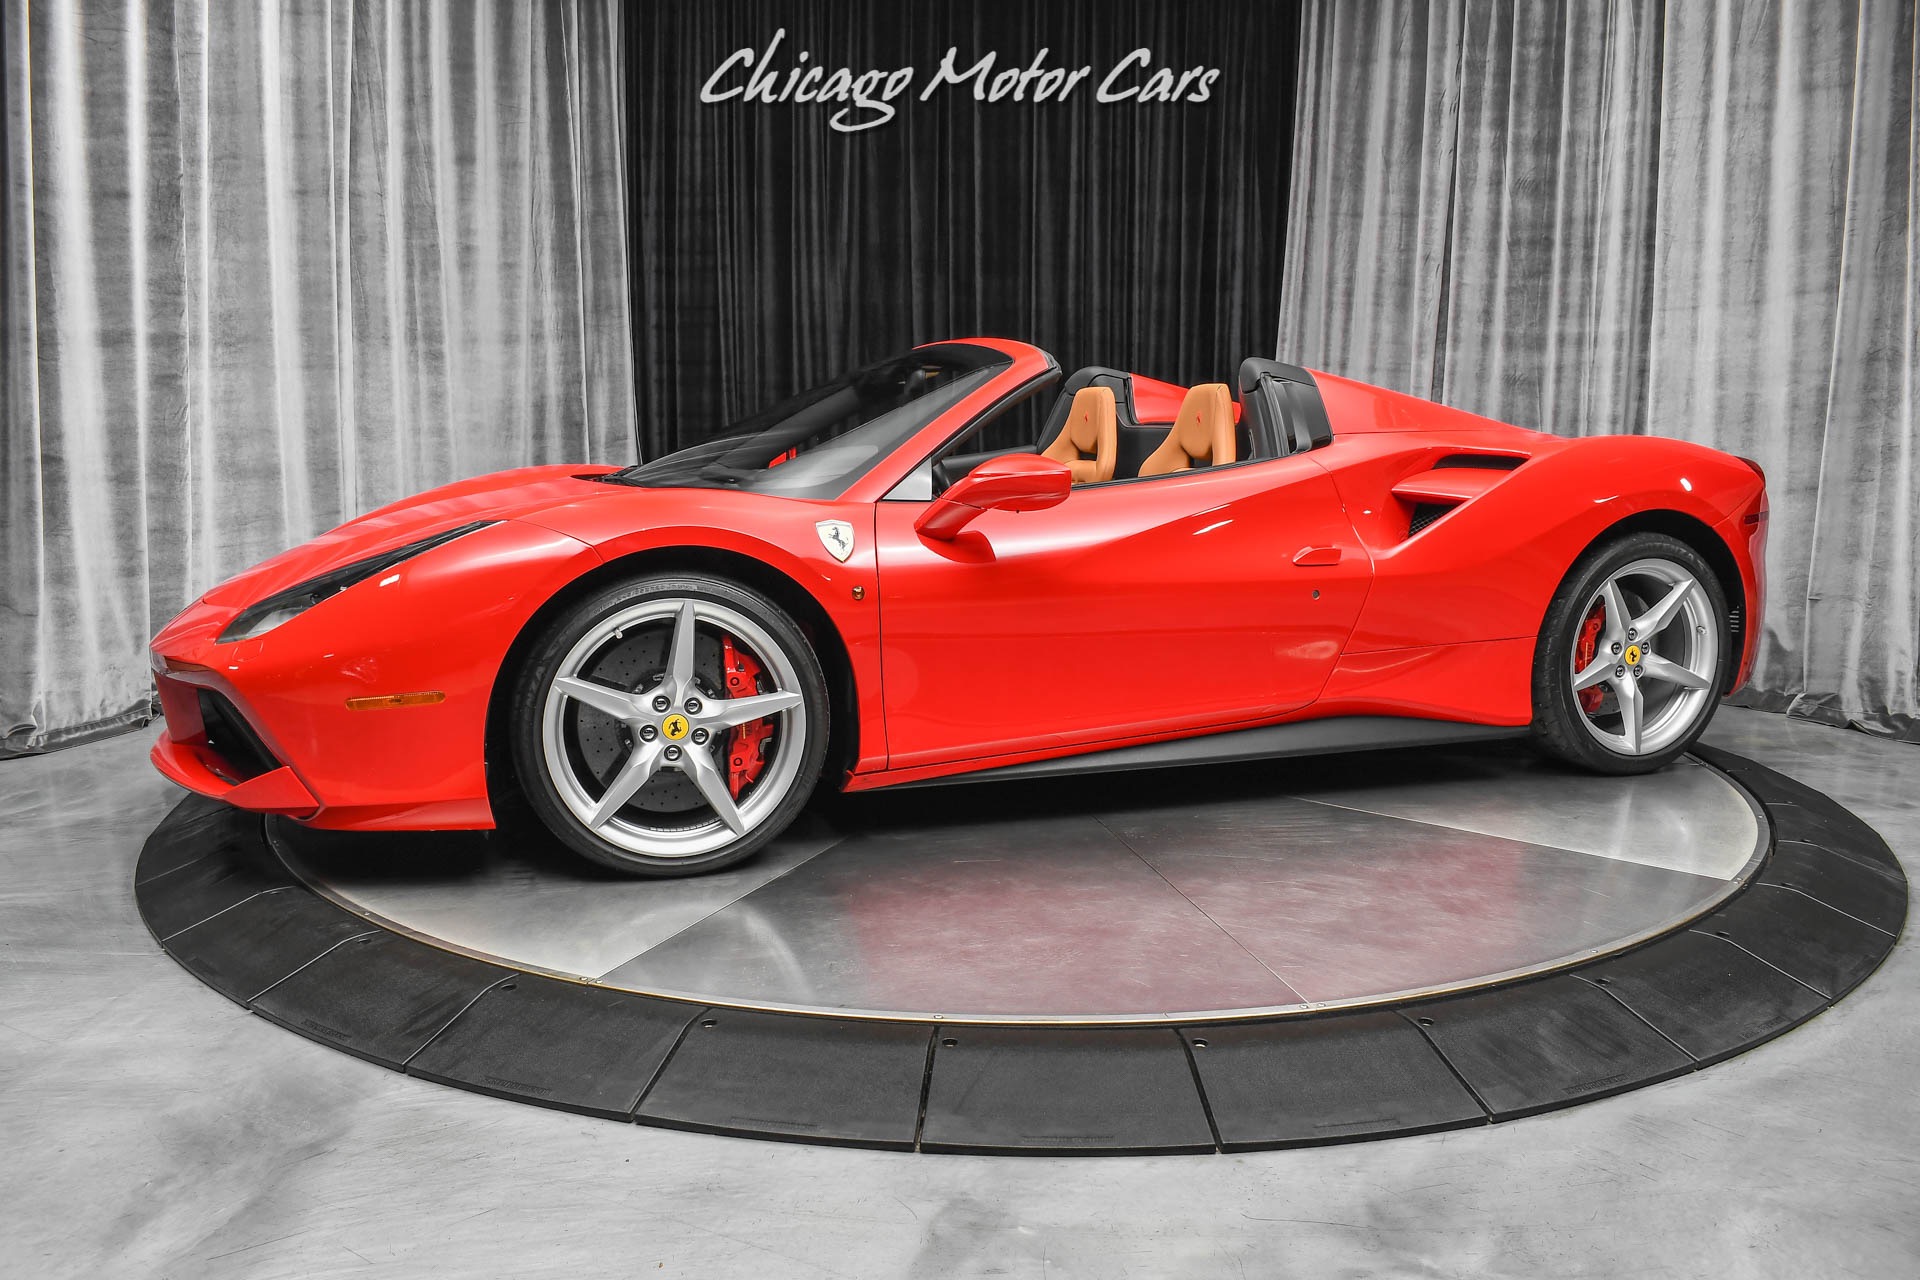 Used 488 Spider Convertible Carbon Fiber Racing Package Well Equipped! Serviced! For Sale Pricing) | Chicago Motor Cars Stock #19107